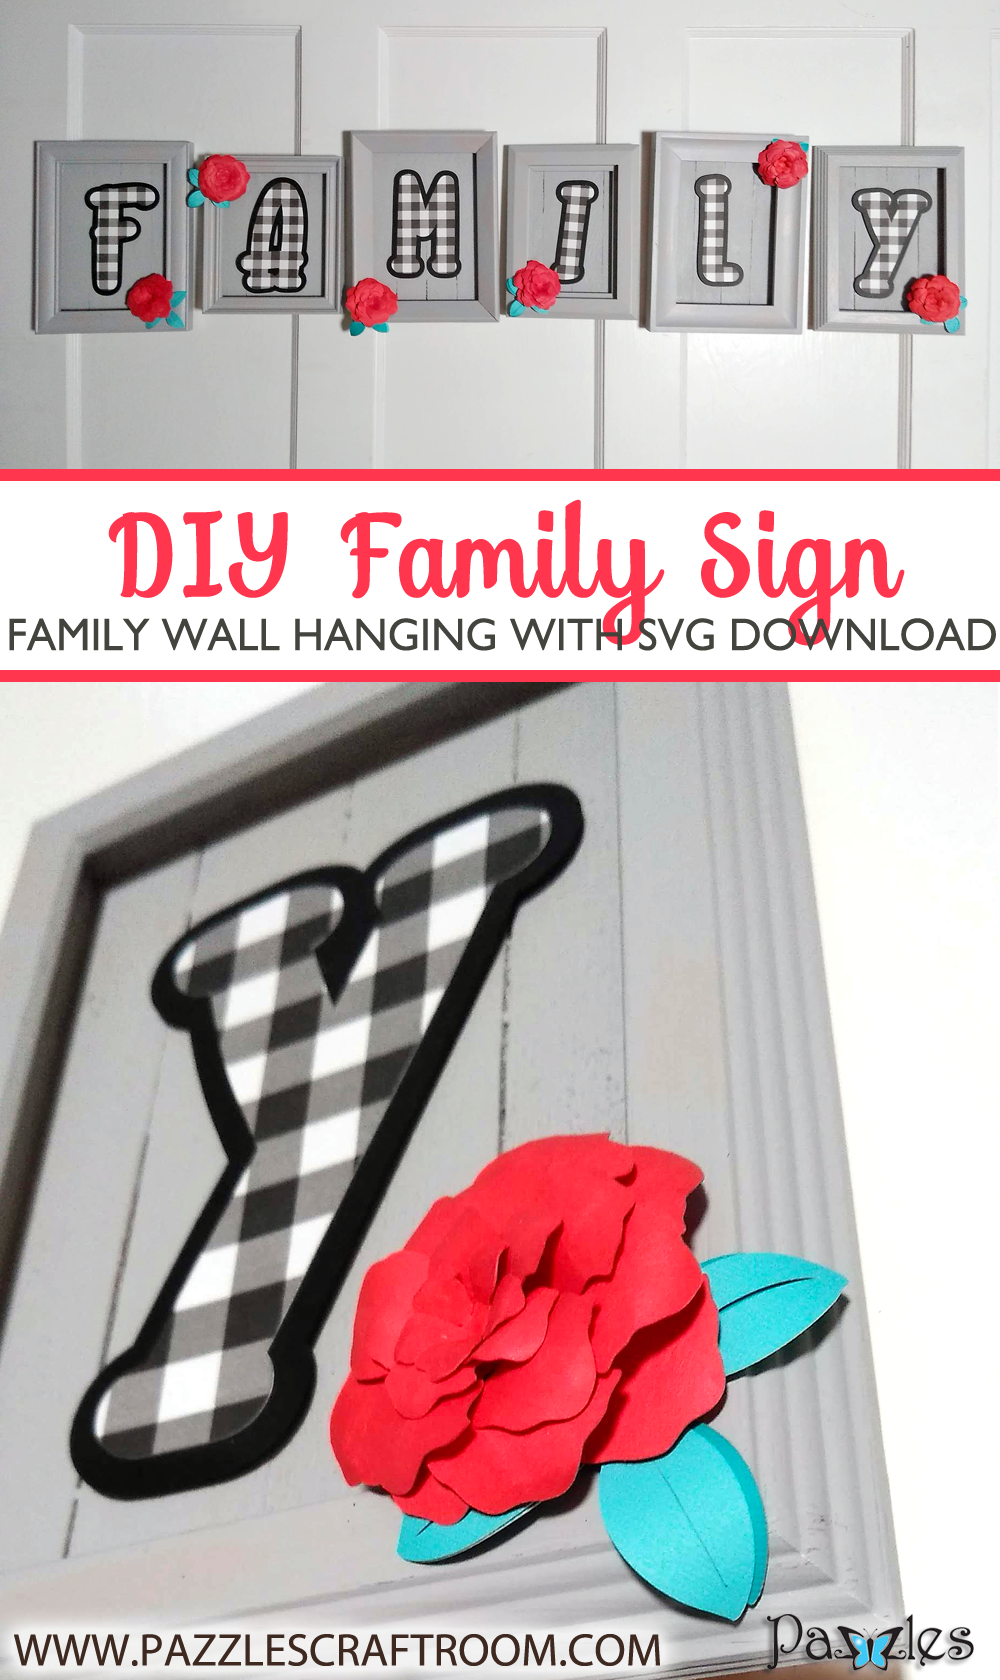 Pazzles DIY Family Sign with instant SVG download. Compatible with all major electronic cutters including Pazzles Inspiration, Cricut, and Silhouette Cameo. Design by Renee Smart.